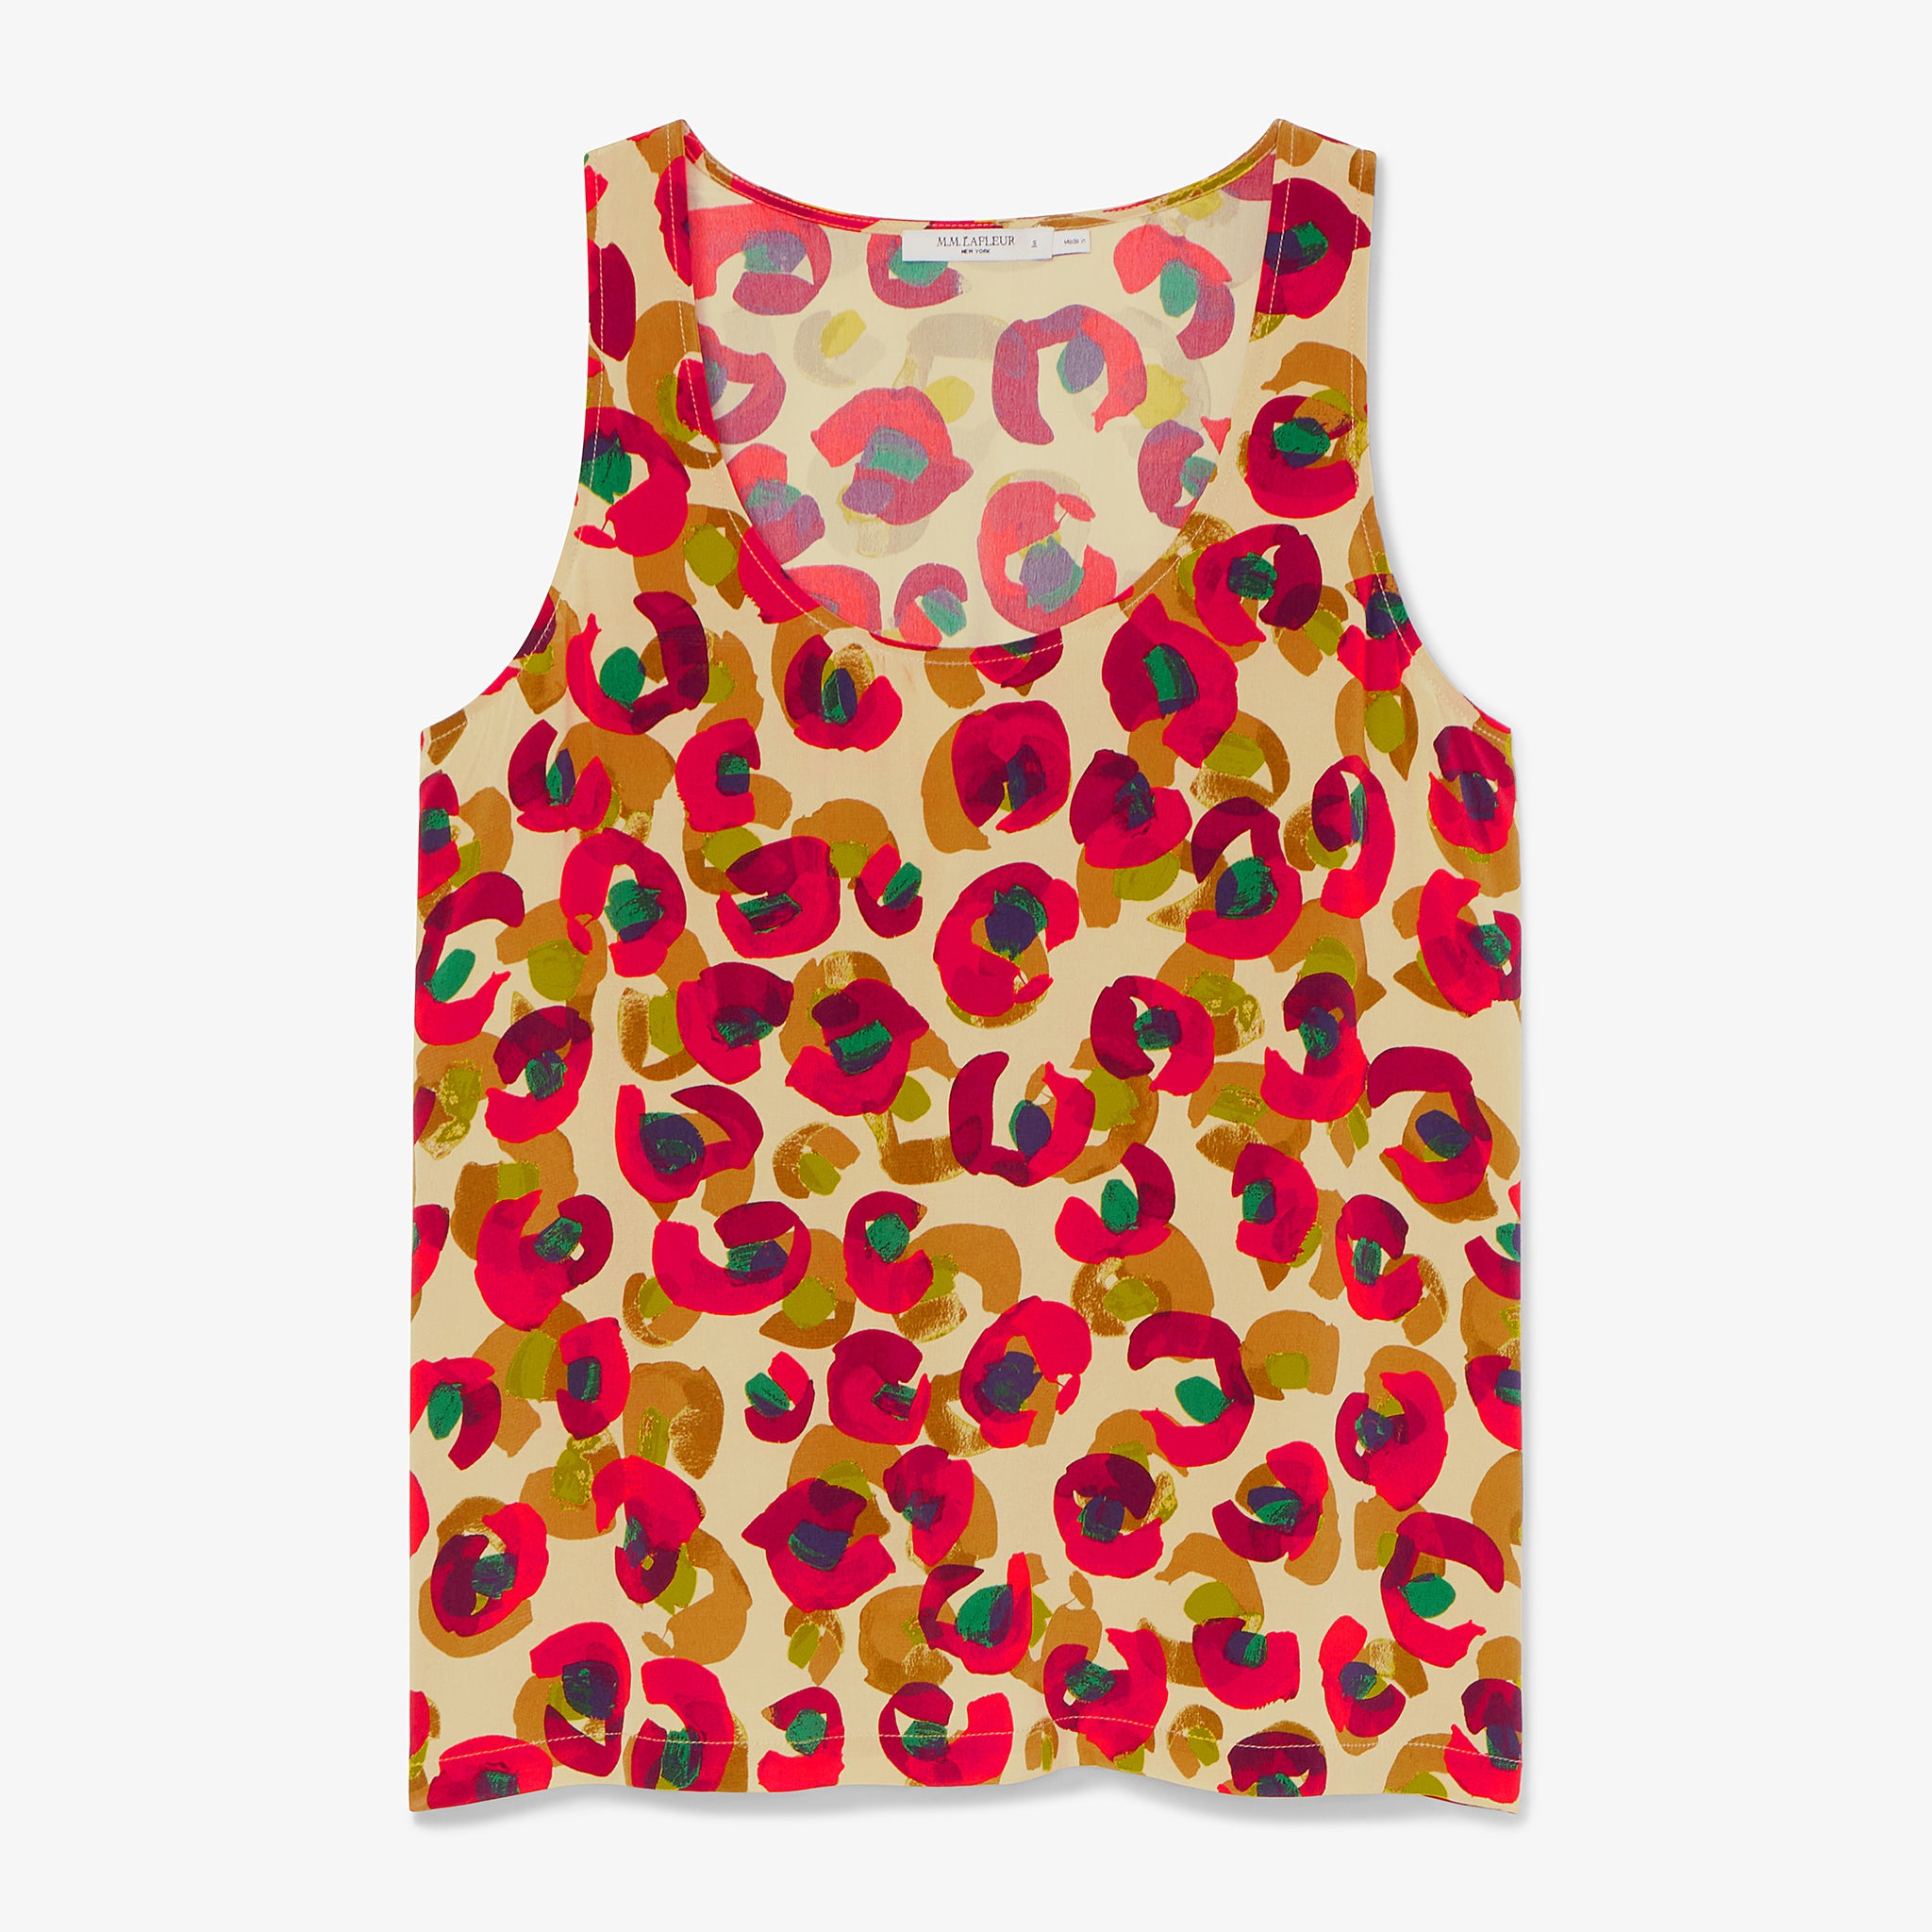 Packshot image of the Vicky Tank in Peacock Print